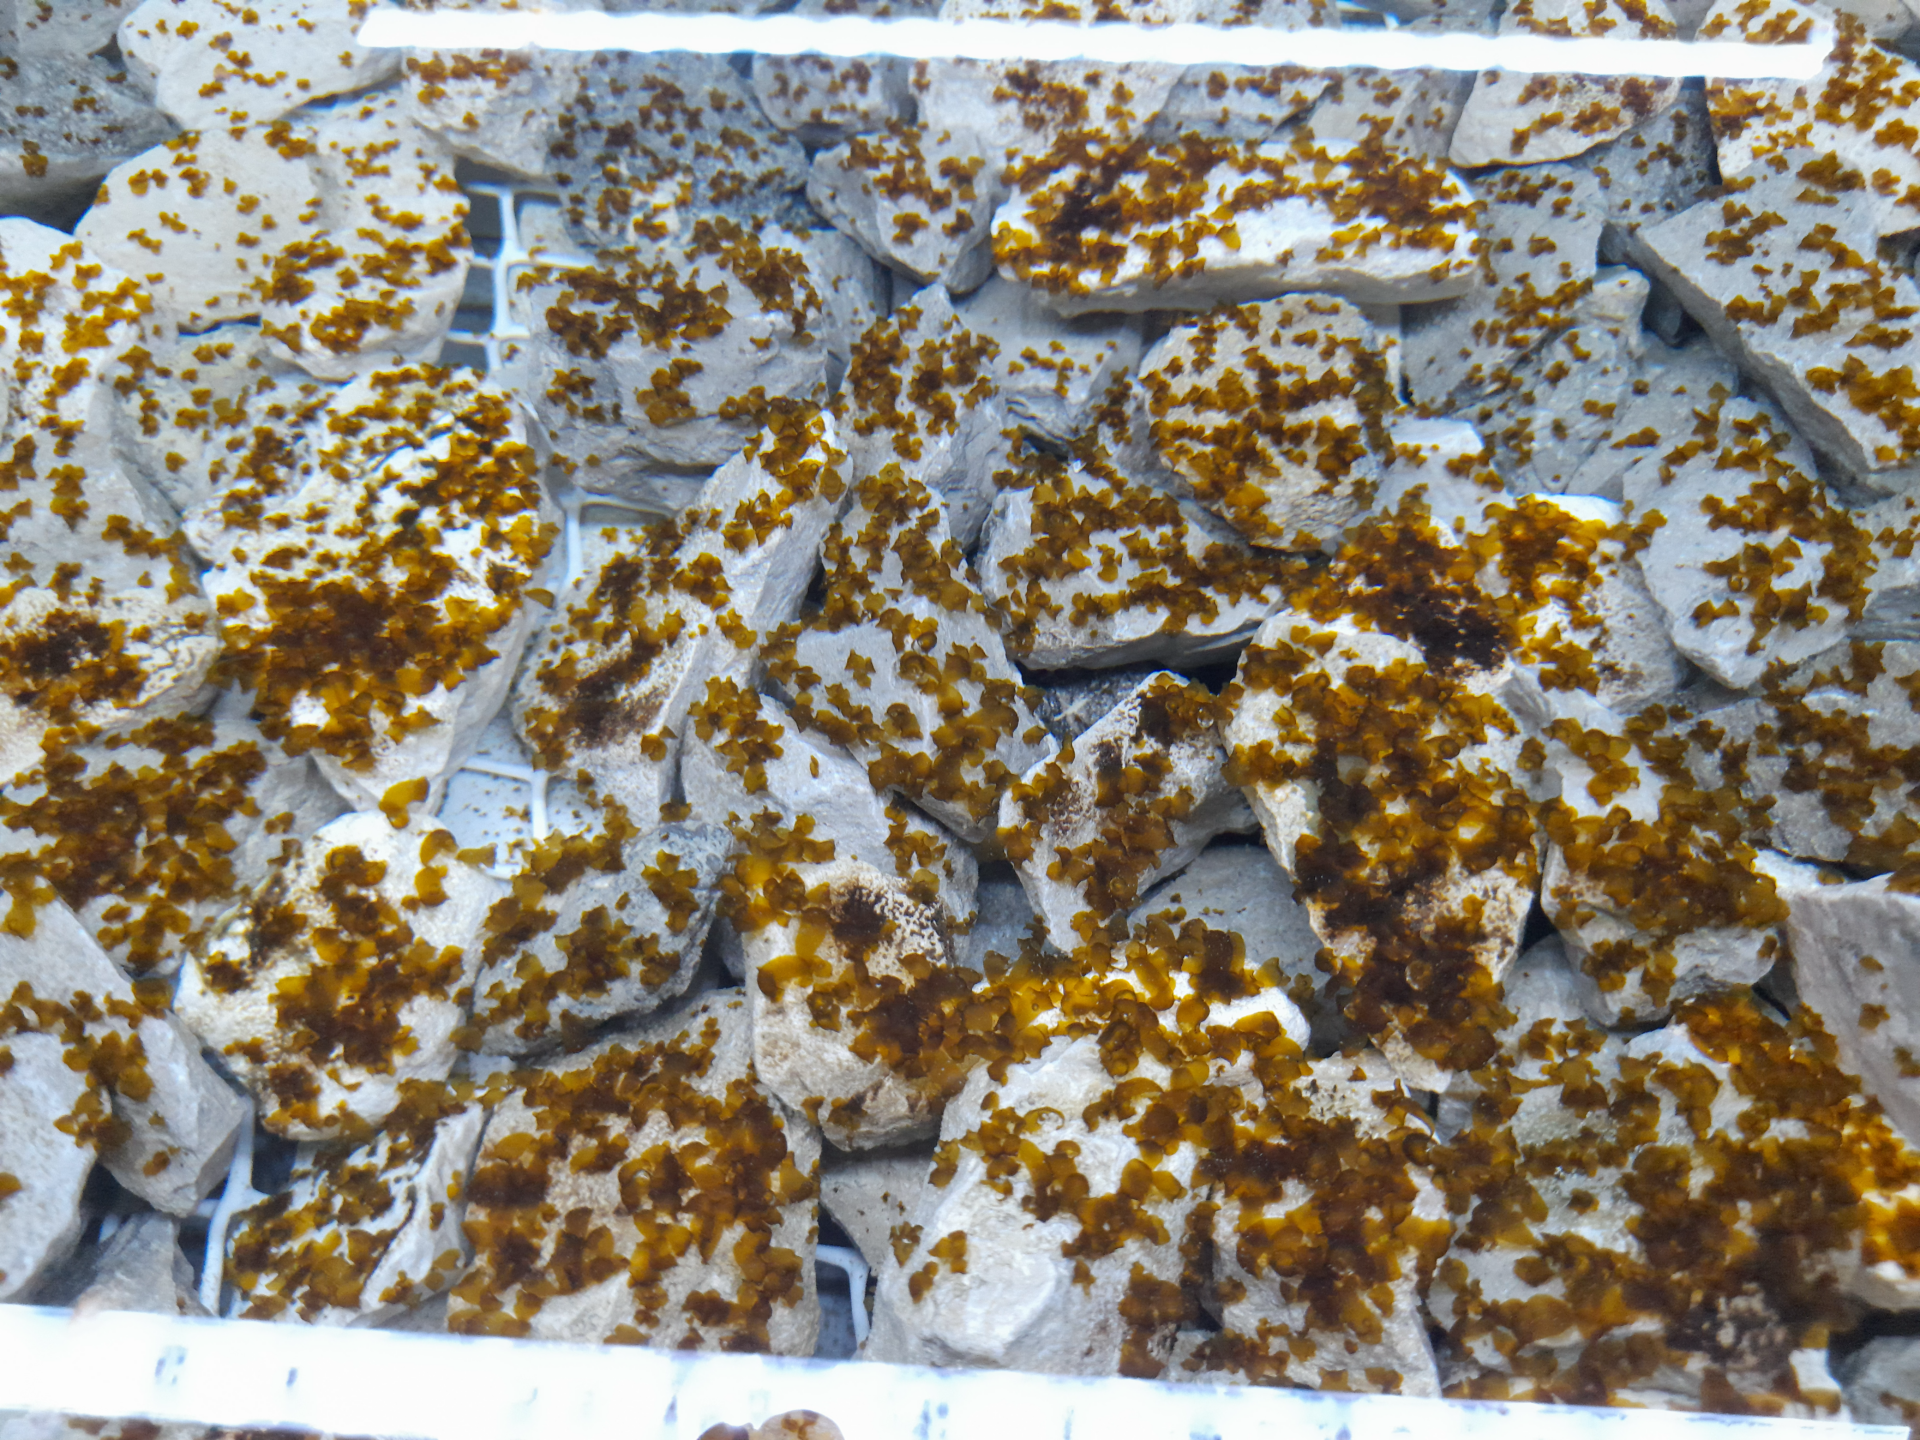 It takes several months in the lab and nursery for kelp gametophytes to grow into these small sporophytes. Once they have grown enough, they are deposited in the SeaForest project site to develop into mature kelp. (Photo courtesy Jan Verbeek)